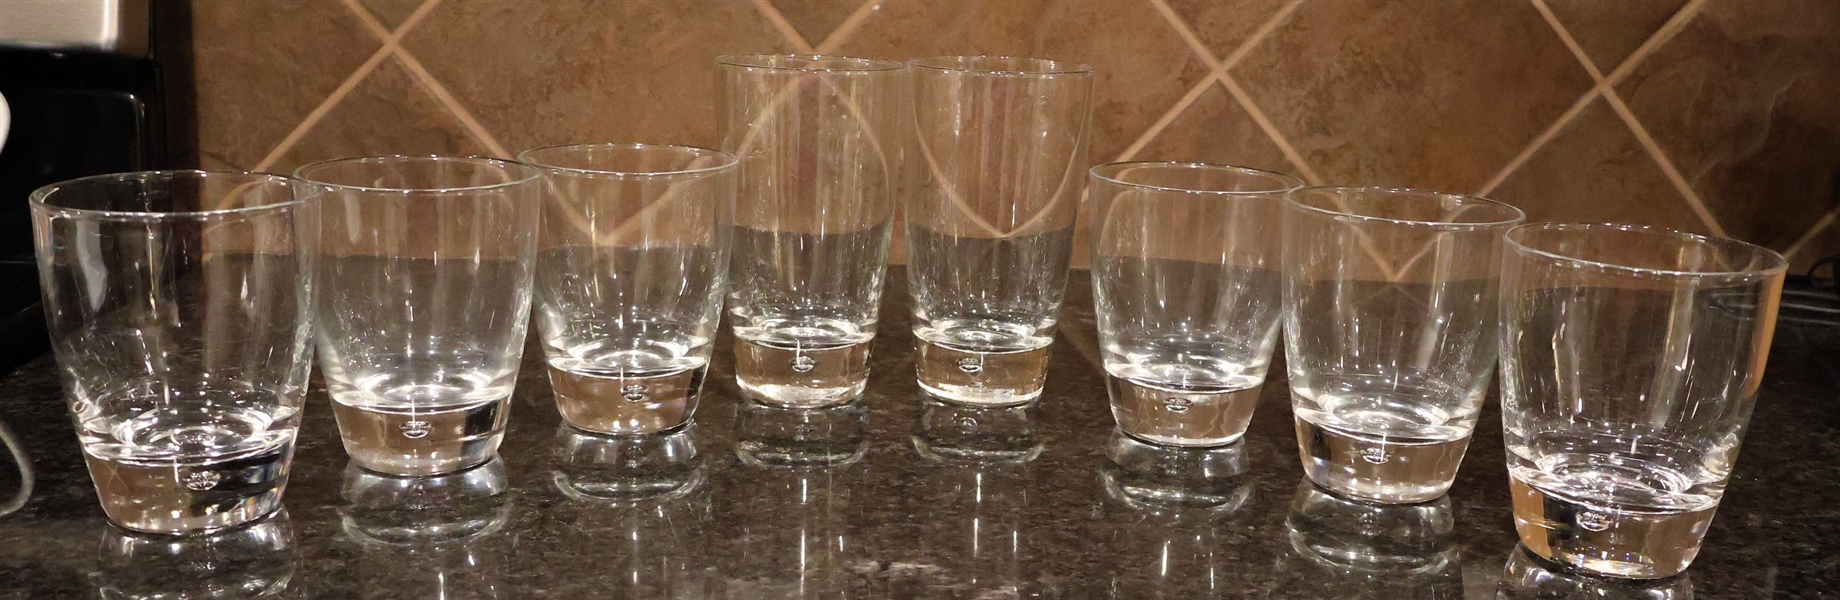 10 Bormioli Rocco Tumblers - 8 - 4 1/2" and 2 - 6" - 2 Not Pictured 